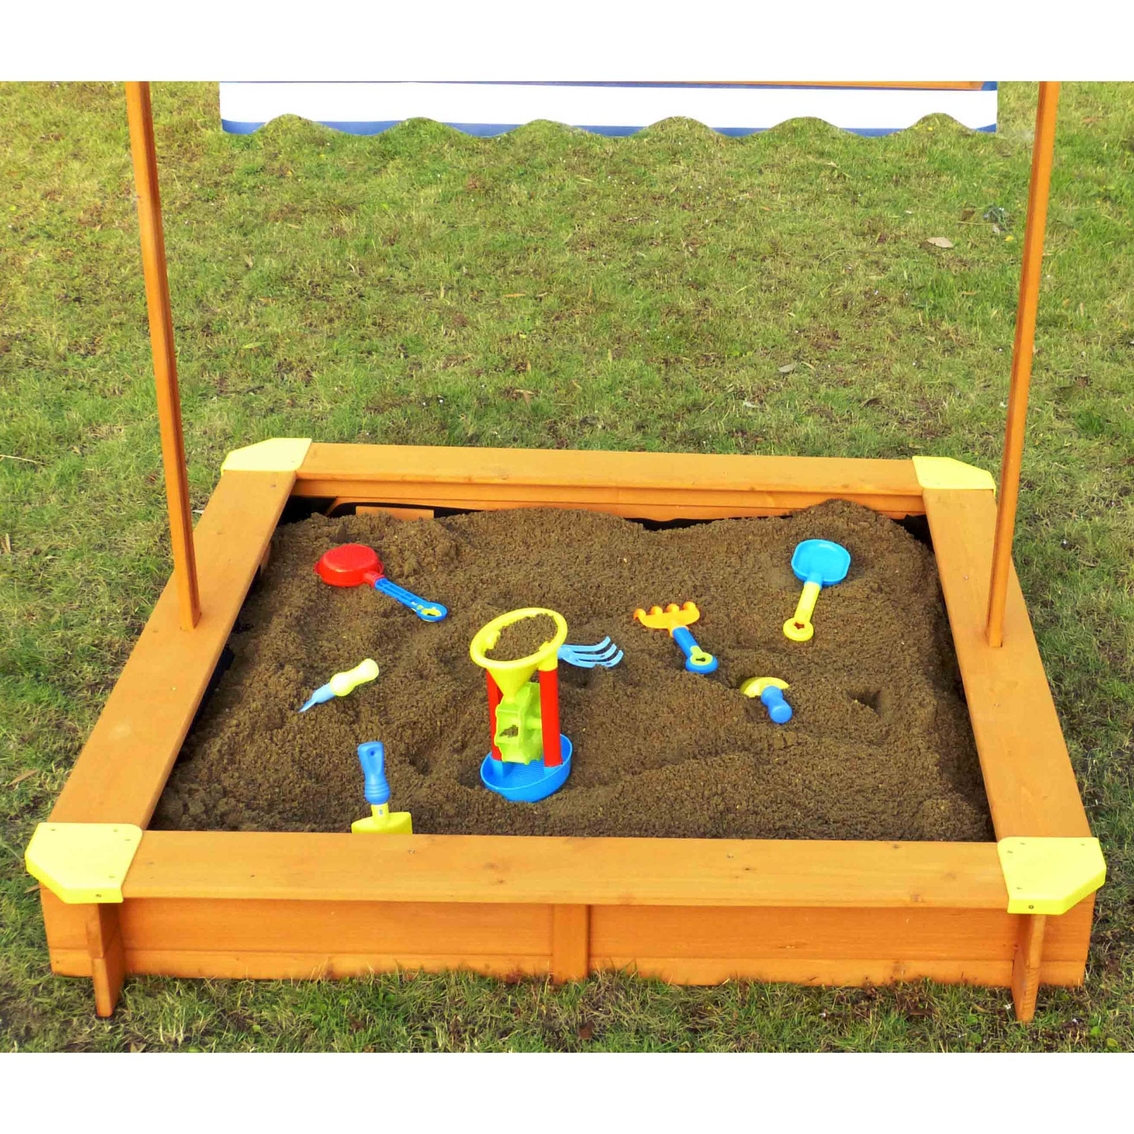 Turtleplay Sandbox with Canopy - Image 3 of 4